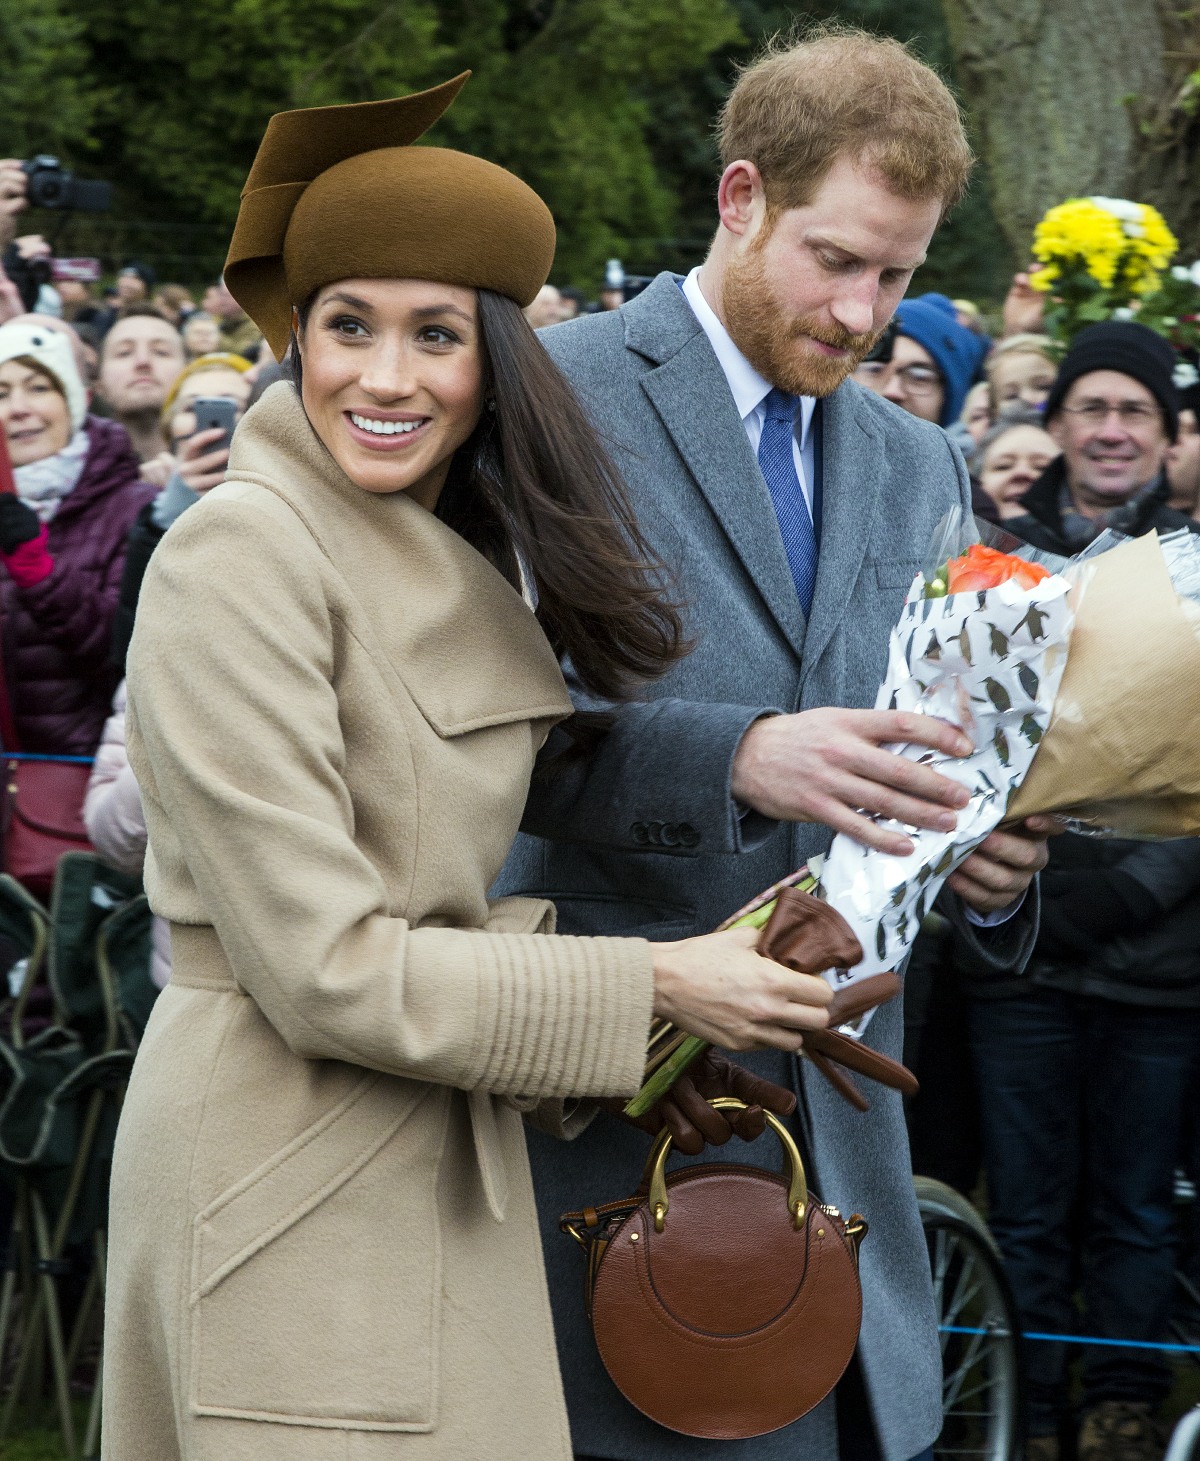 The British Royal family arrive at Sandringham to celebrate Christmas Day